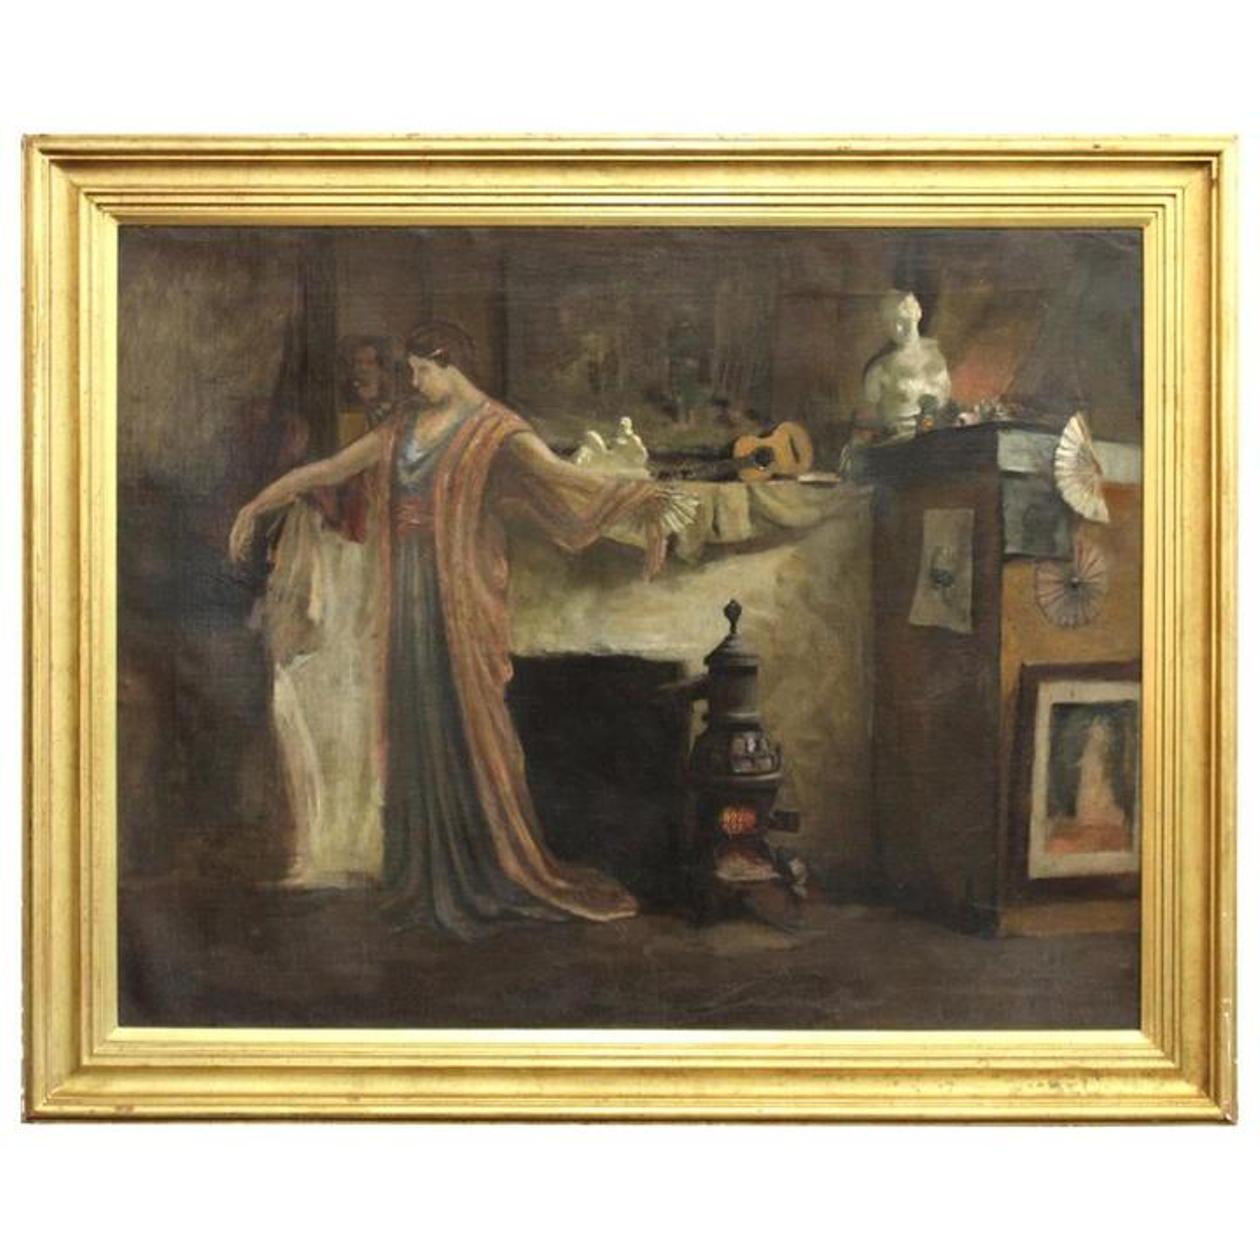 Benjamin Henry Day, Jr. Figurative Painting -  Woman posing in artist studio interior with antique objects